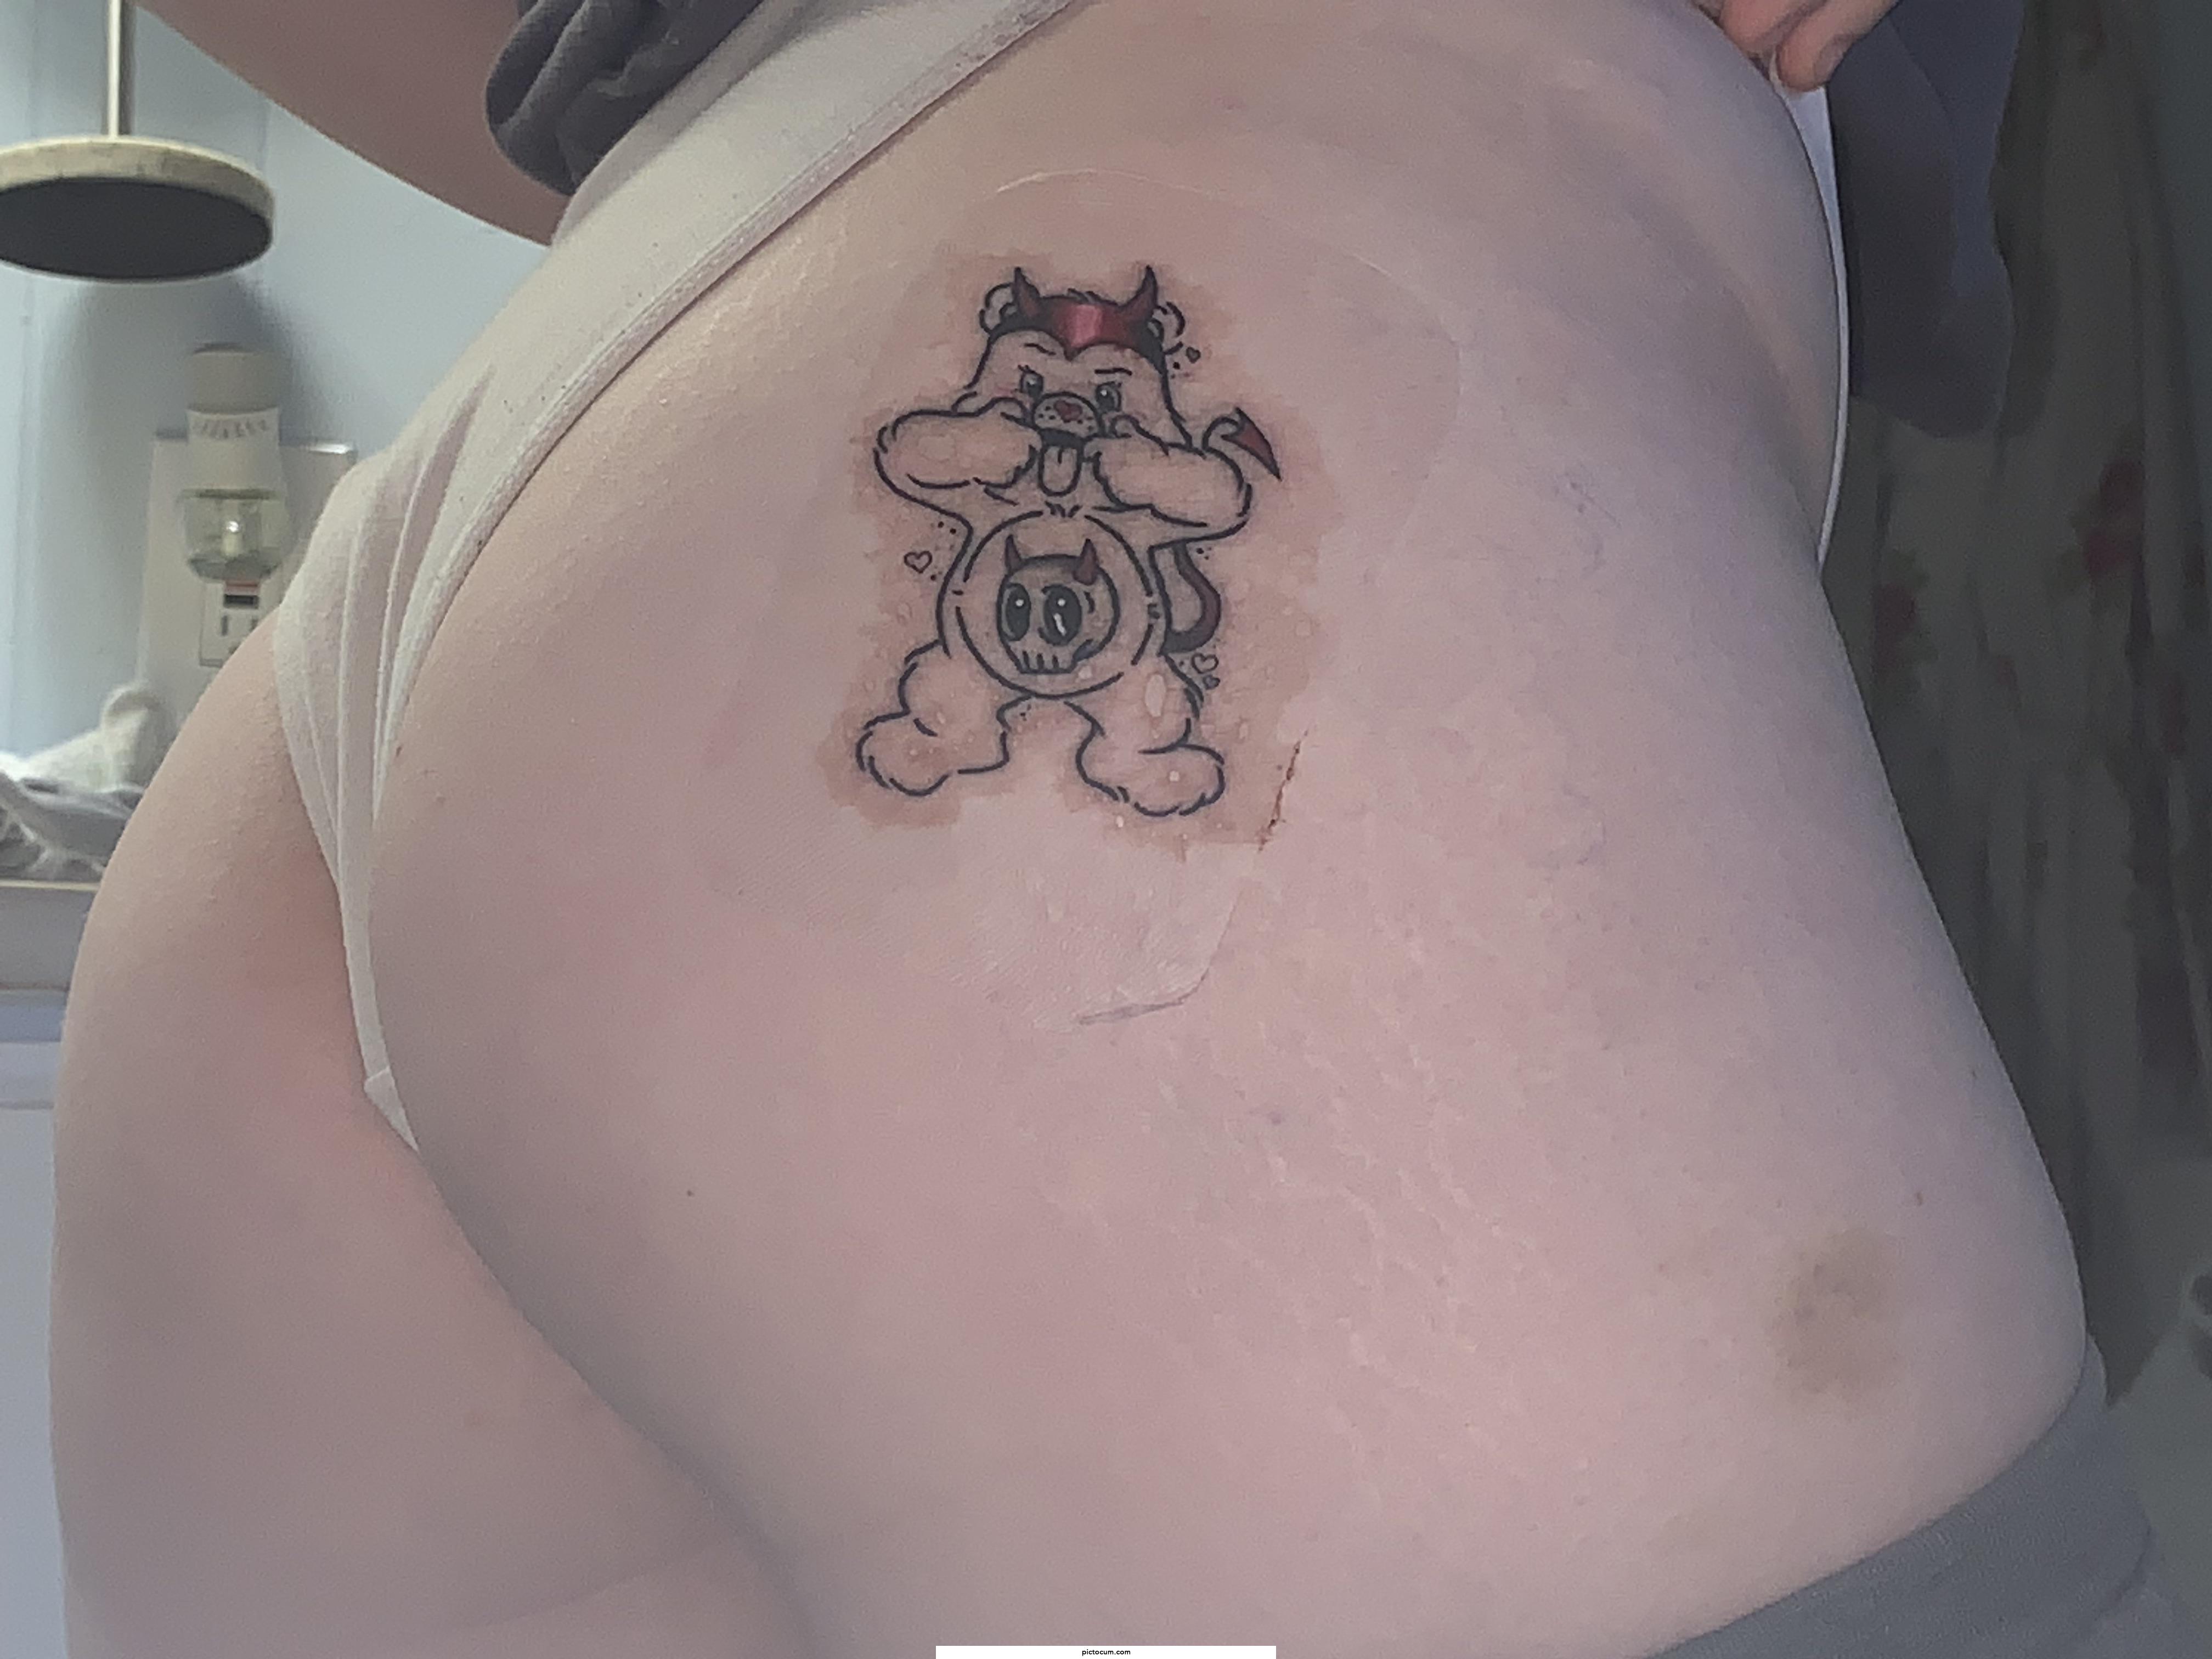 just turned 18 today and got my first ink🥰 what do you think??😌